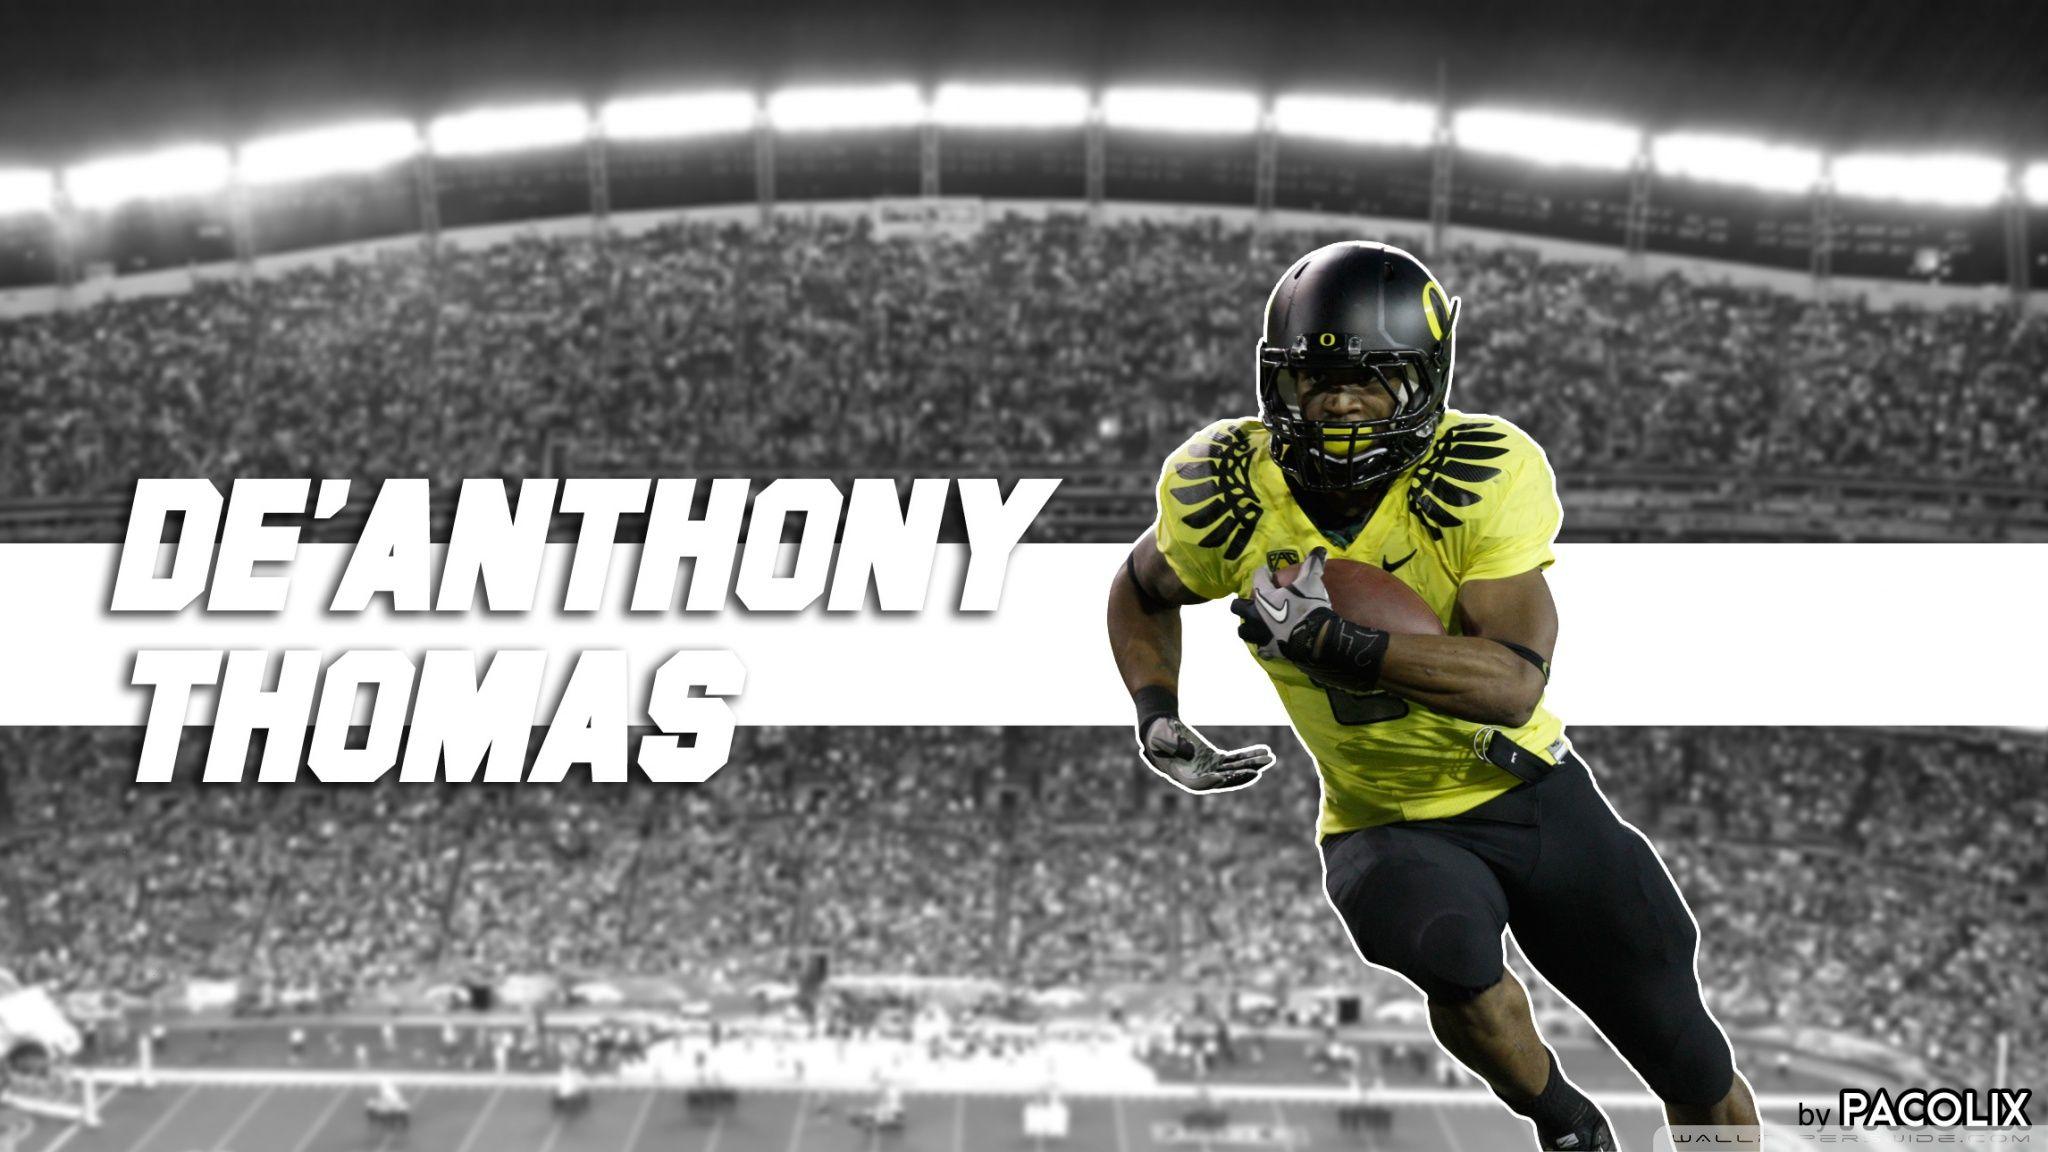 De Anthony Thomas Wallpapers - Wallpaper Cave